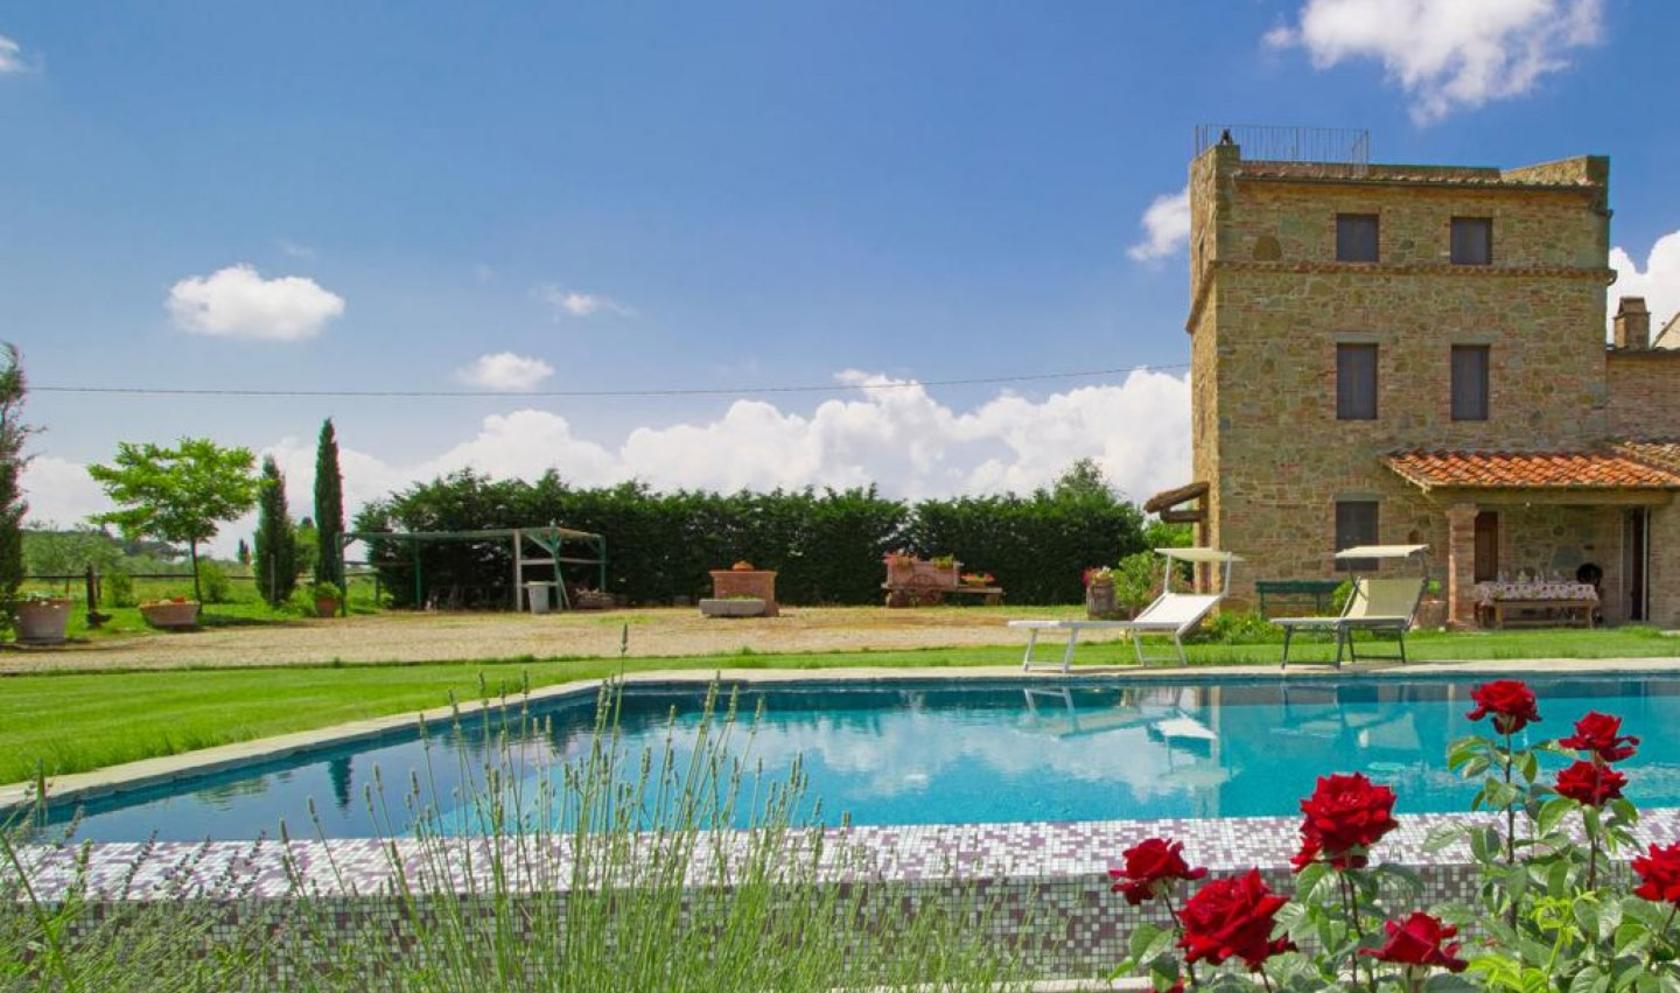 Toscana Immobiliare - Countryhouse with pool for sale in Cortona, Tuscany